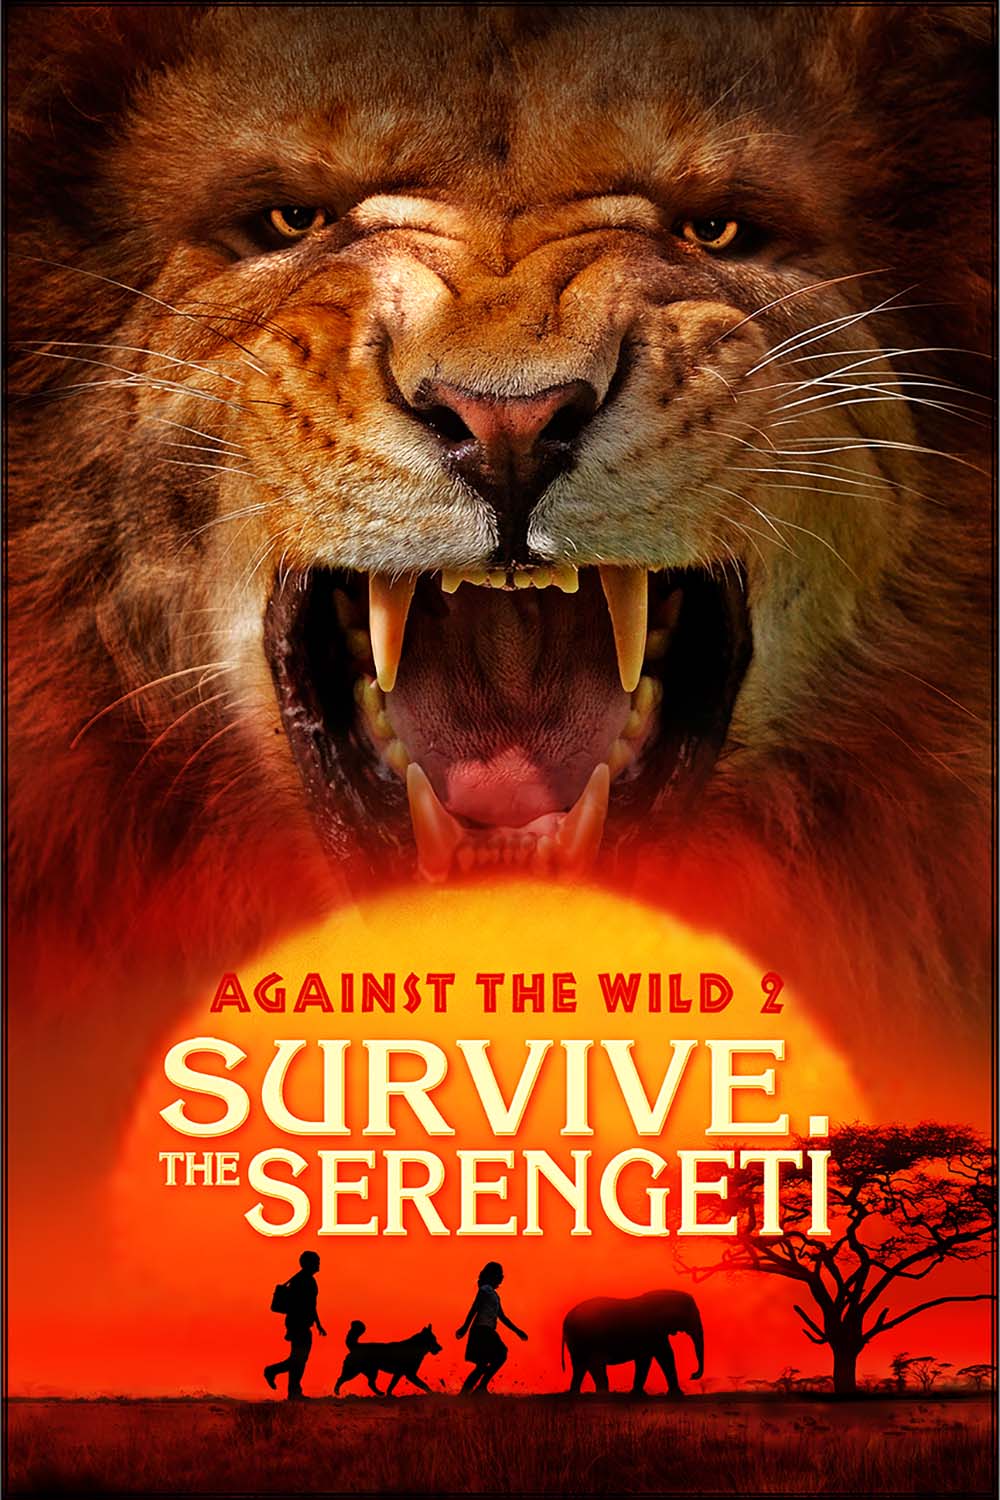 Against the wild survive the serengeti